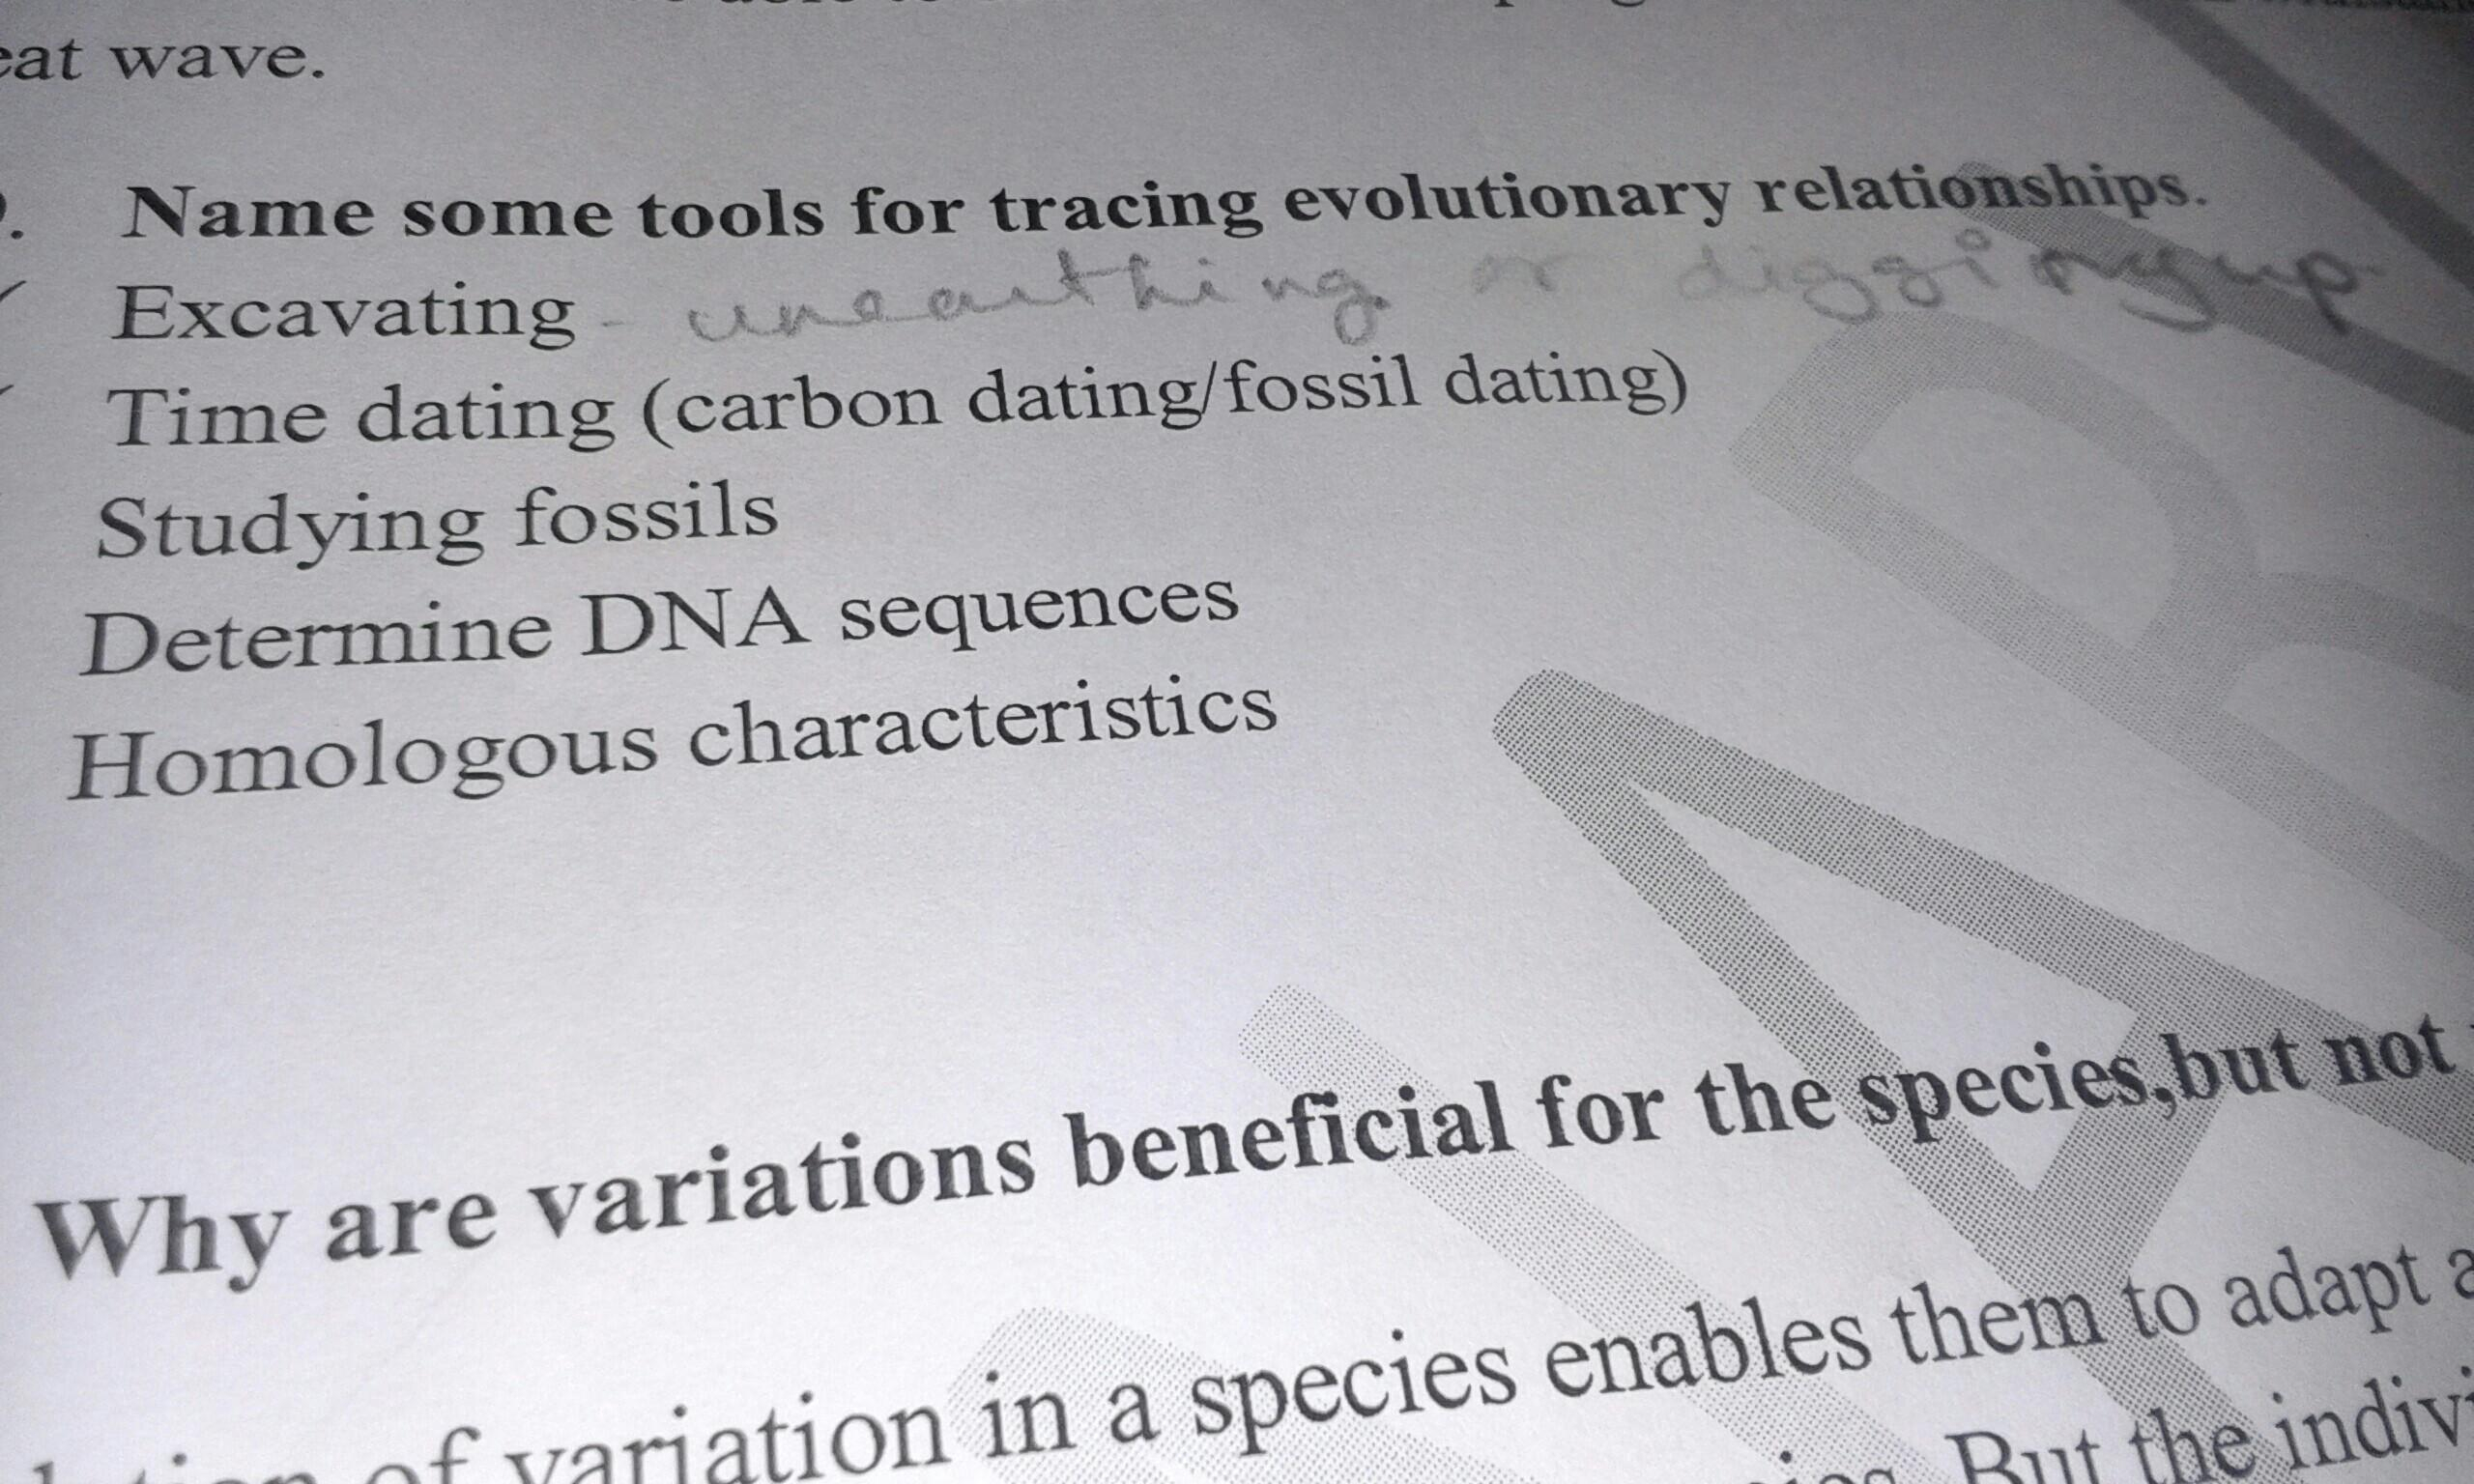 Tools For Tracing Evolutionary Relationship In Brief About intended for Name Some Tools For Tracing Evolutionary Relationships